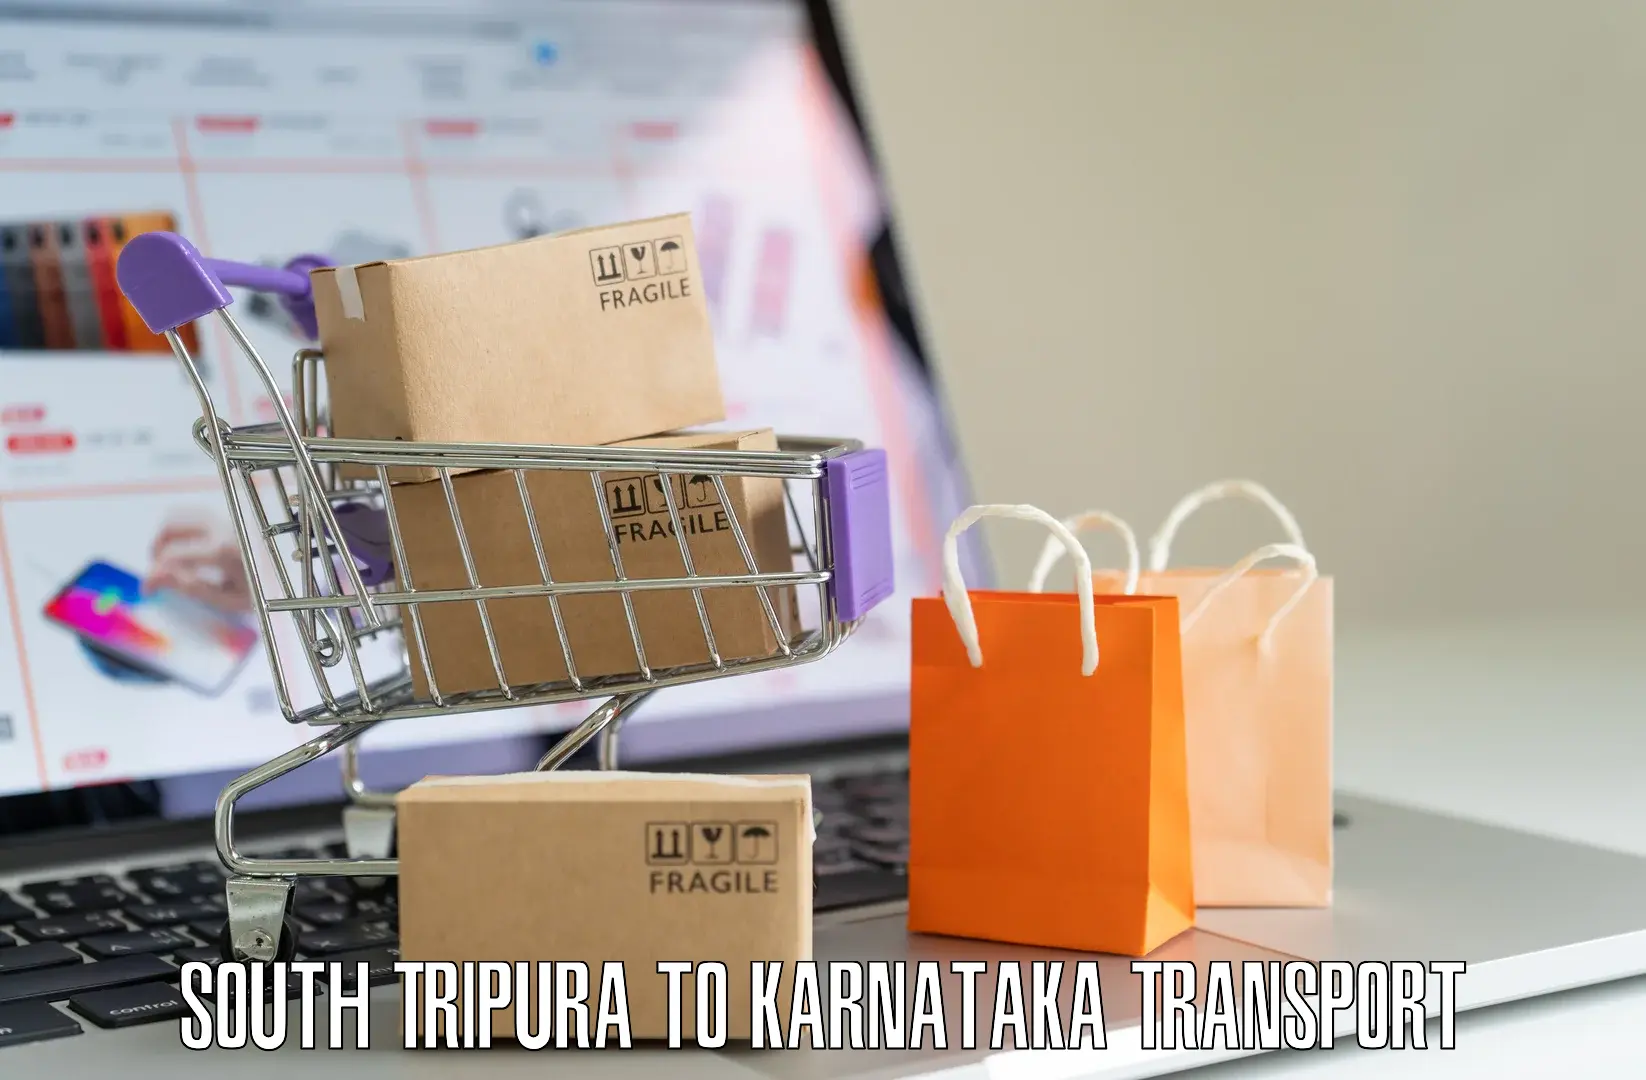 Material transport services South Tripura to Gurmatkal